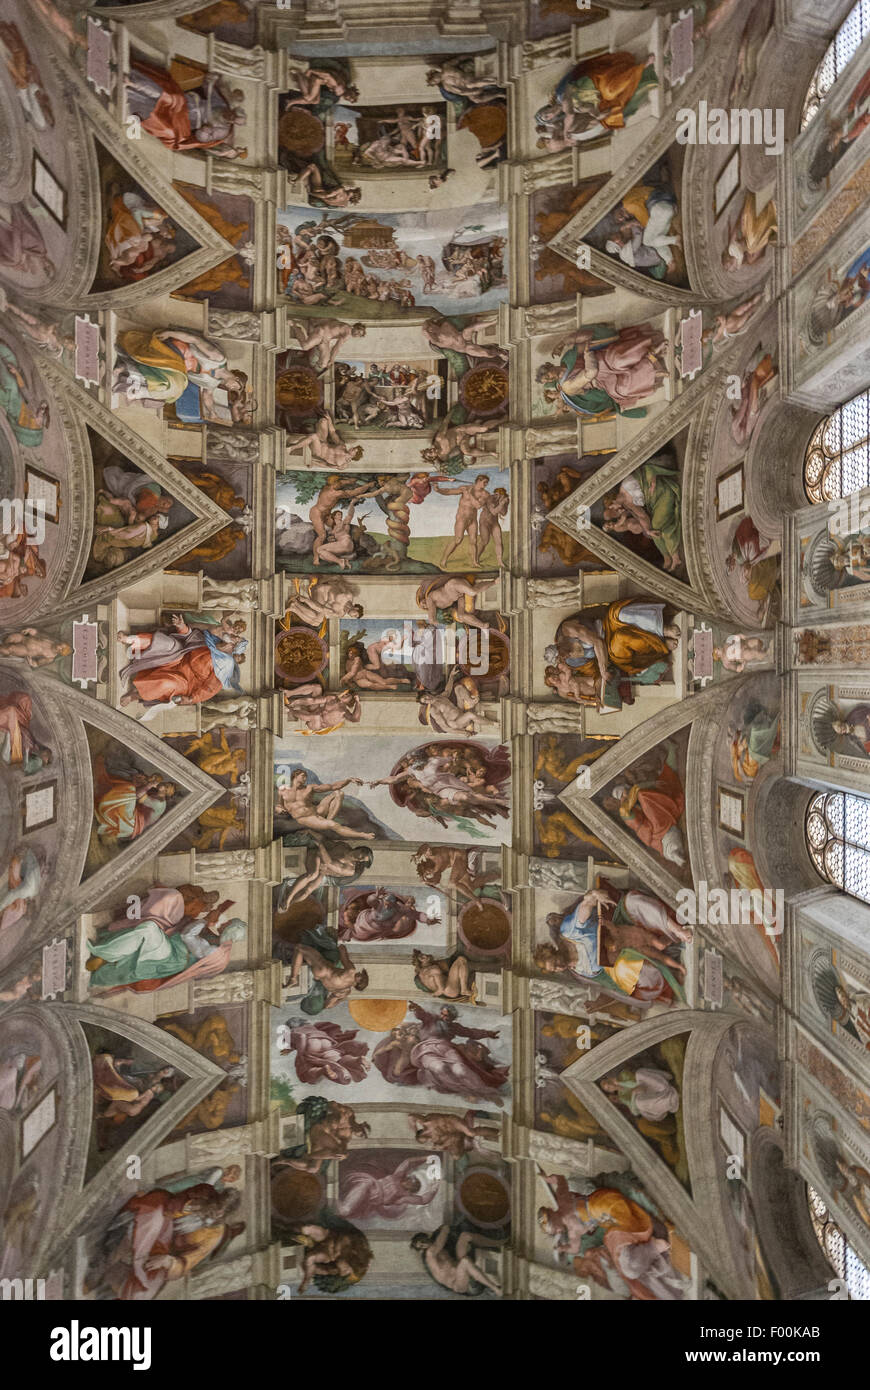 The Sistine Chapel ceiling, painted by Michelangelo. Vatican Museums, Vatican City, Rome Italy Stock Photo